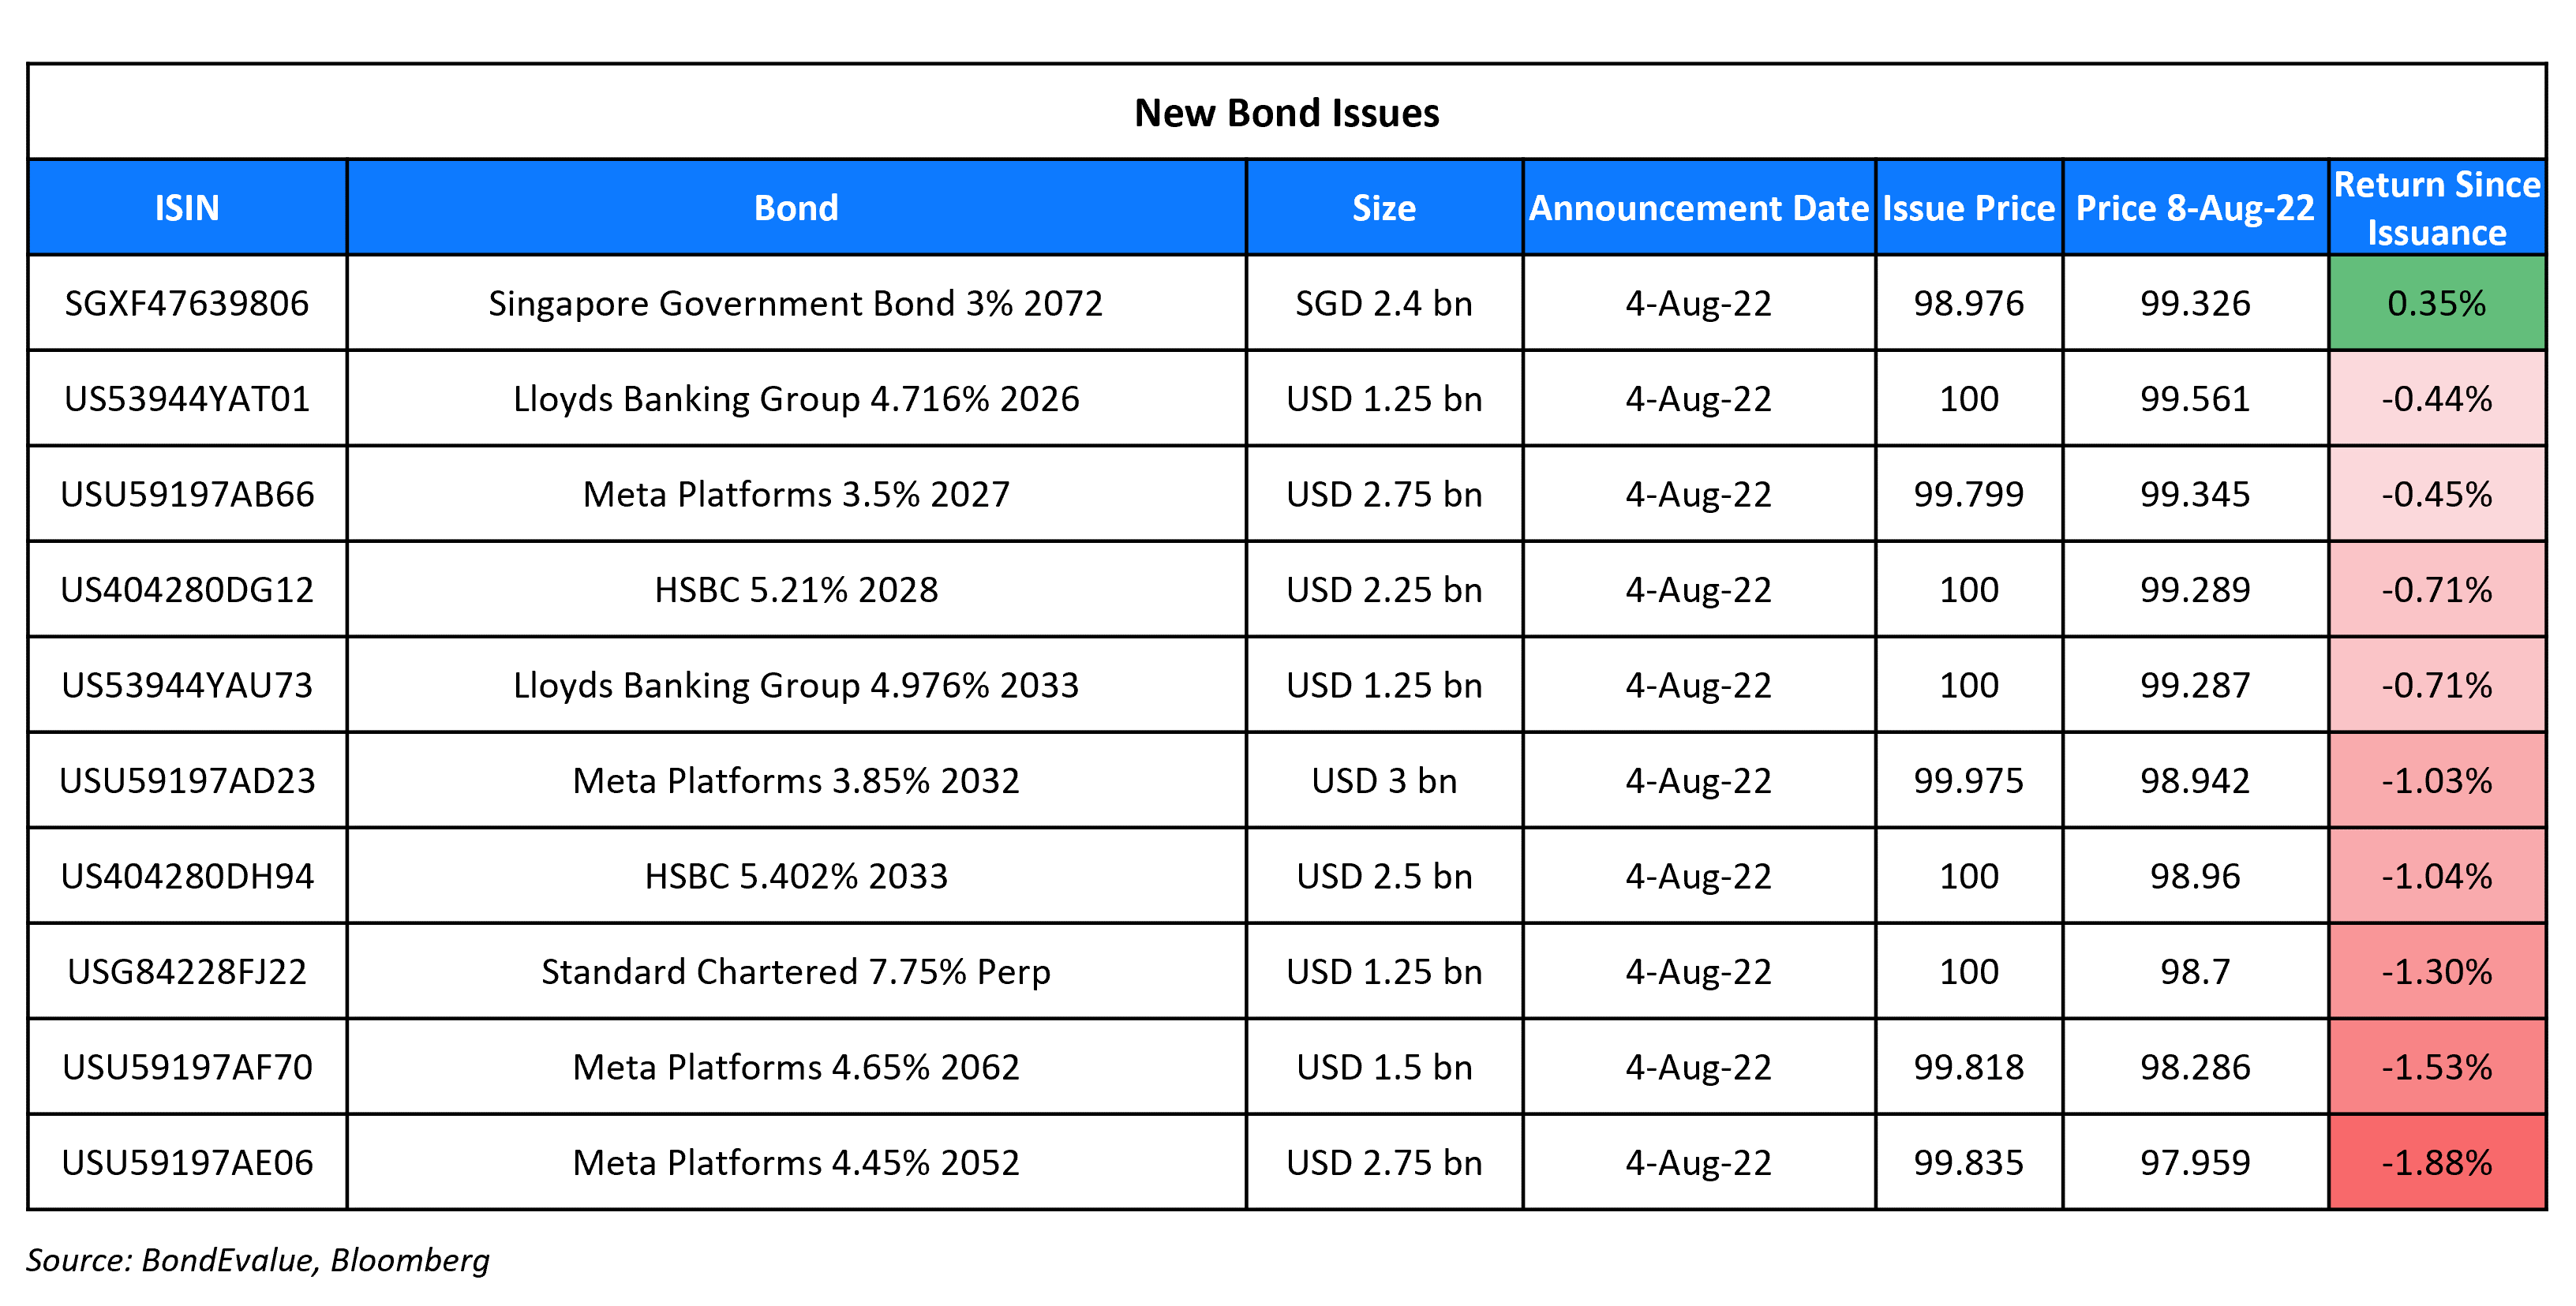 New Bond Issues 8 Aug 22